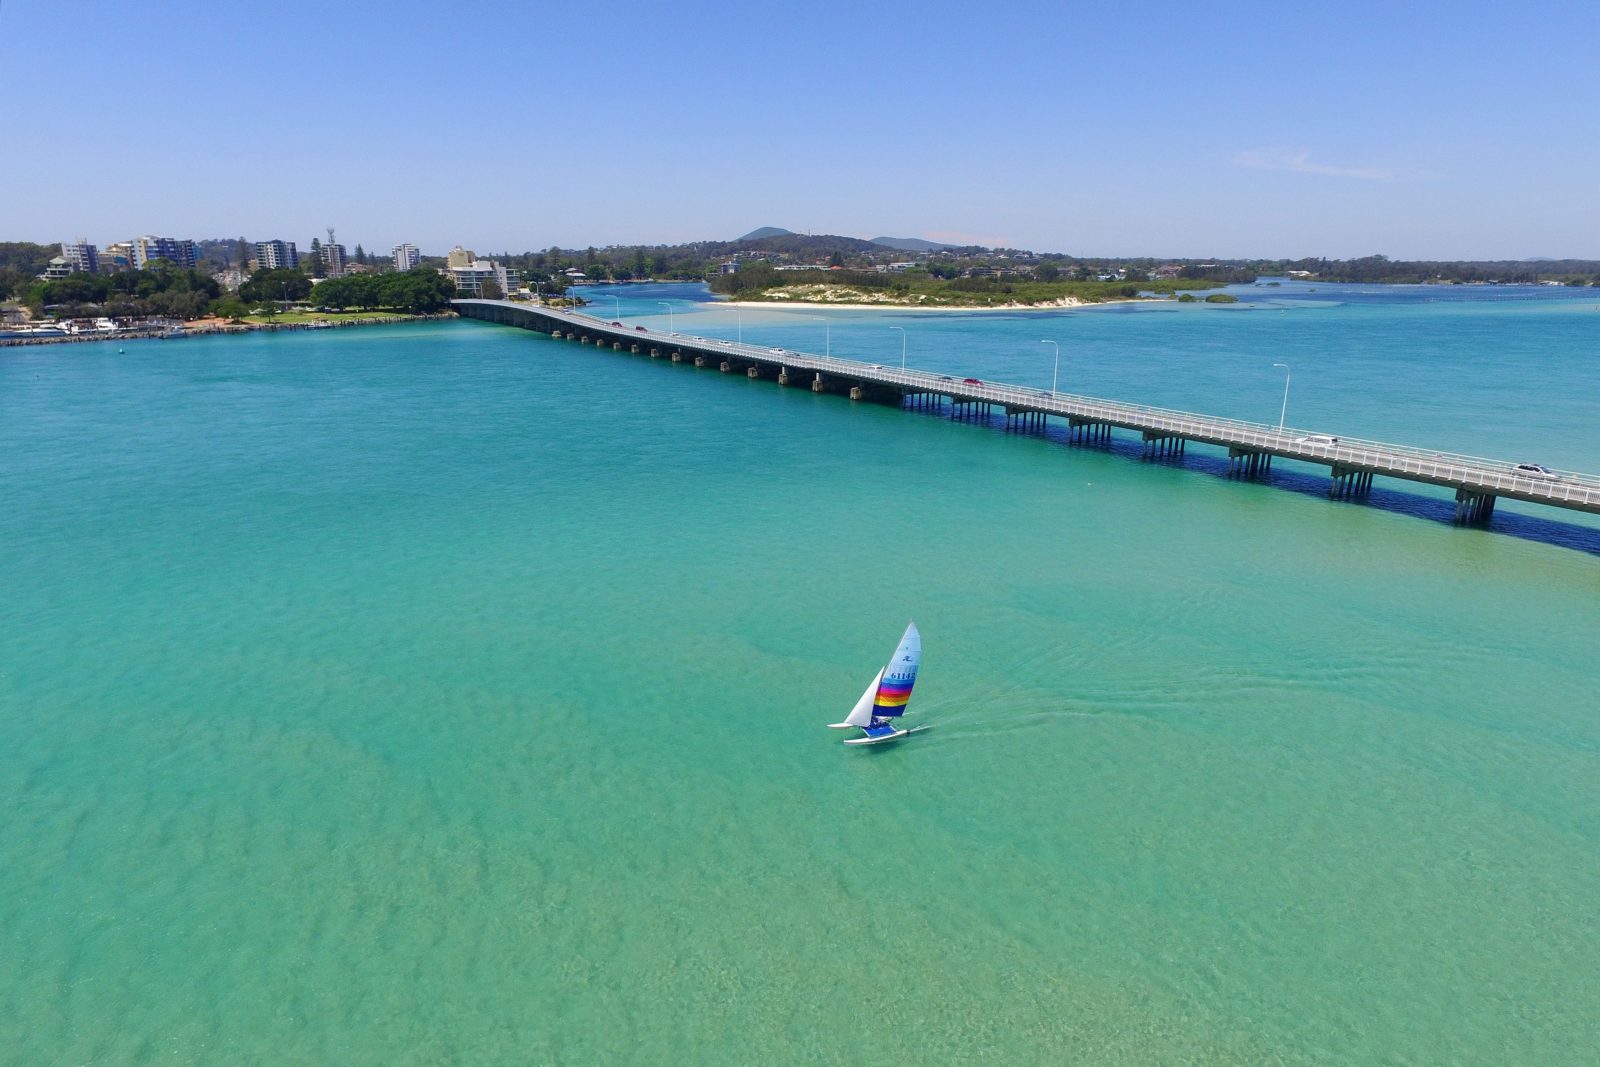 Wallis Lake at Forster-Tuncurry in the Barrington Coast